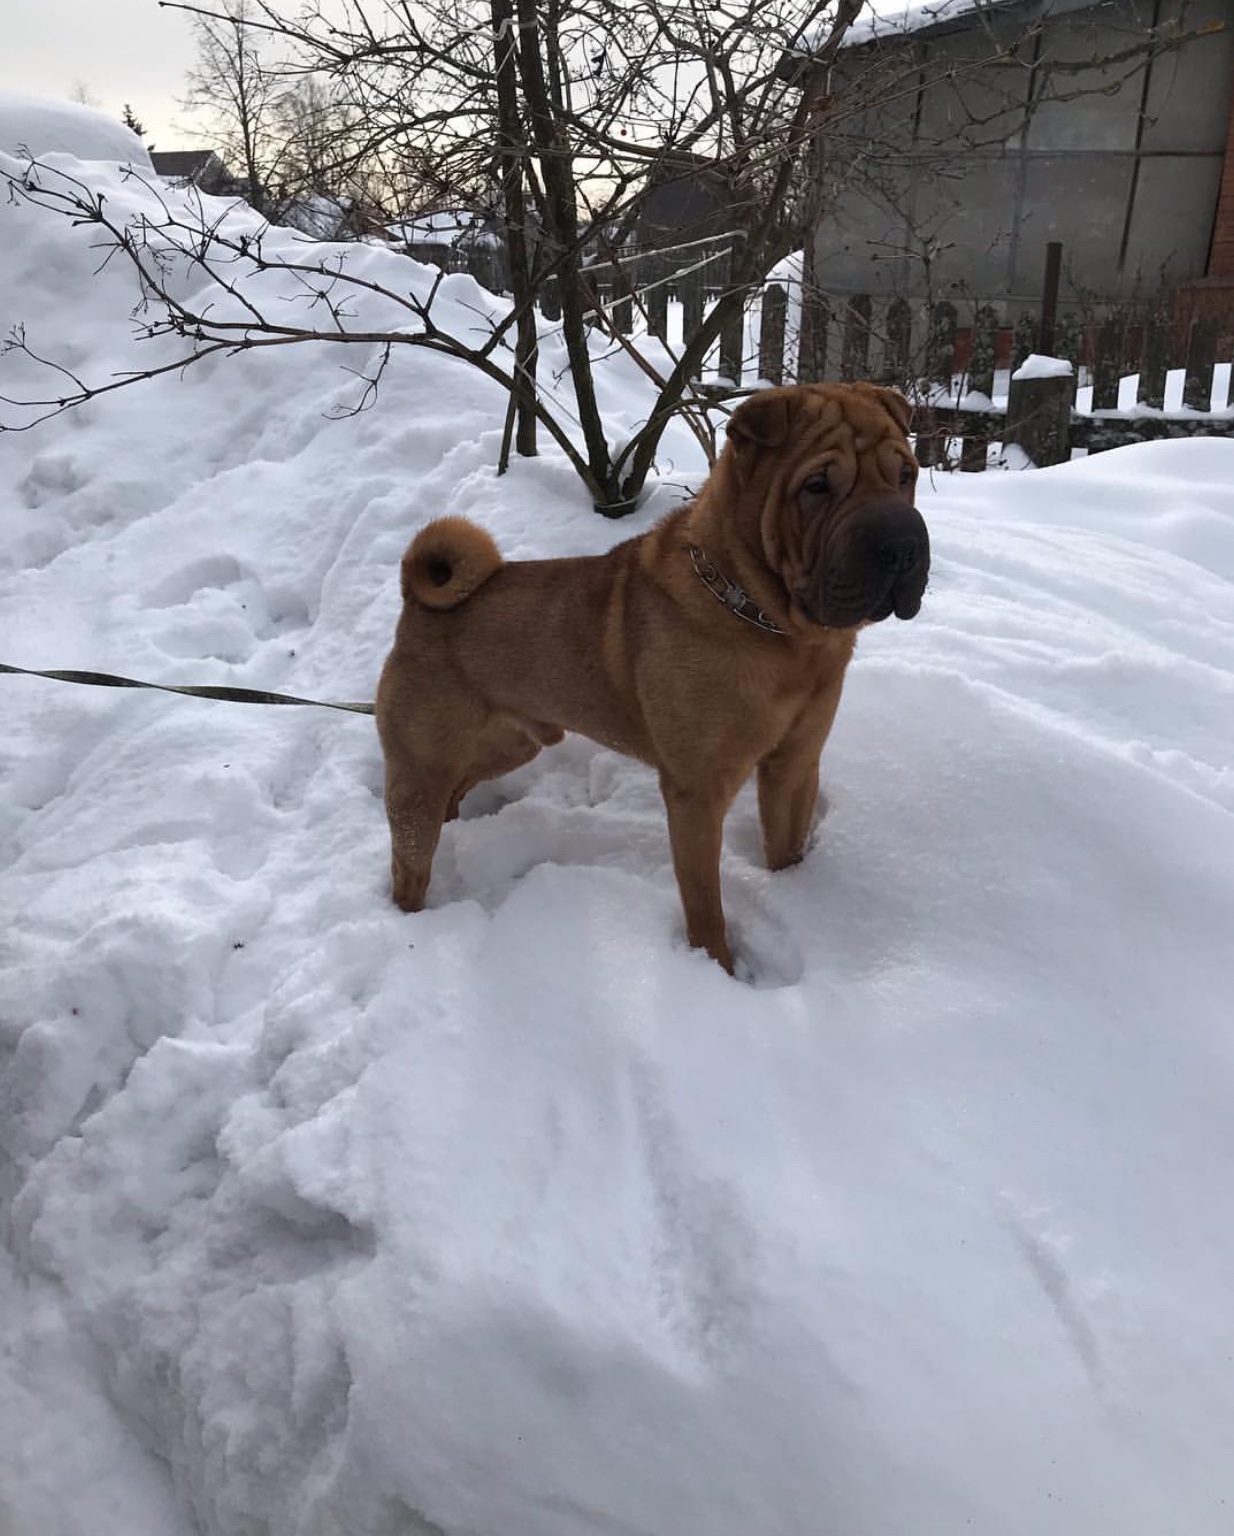 A Shar-Pei standing in snow outdoors